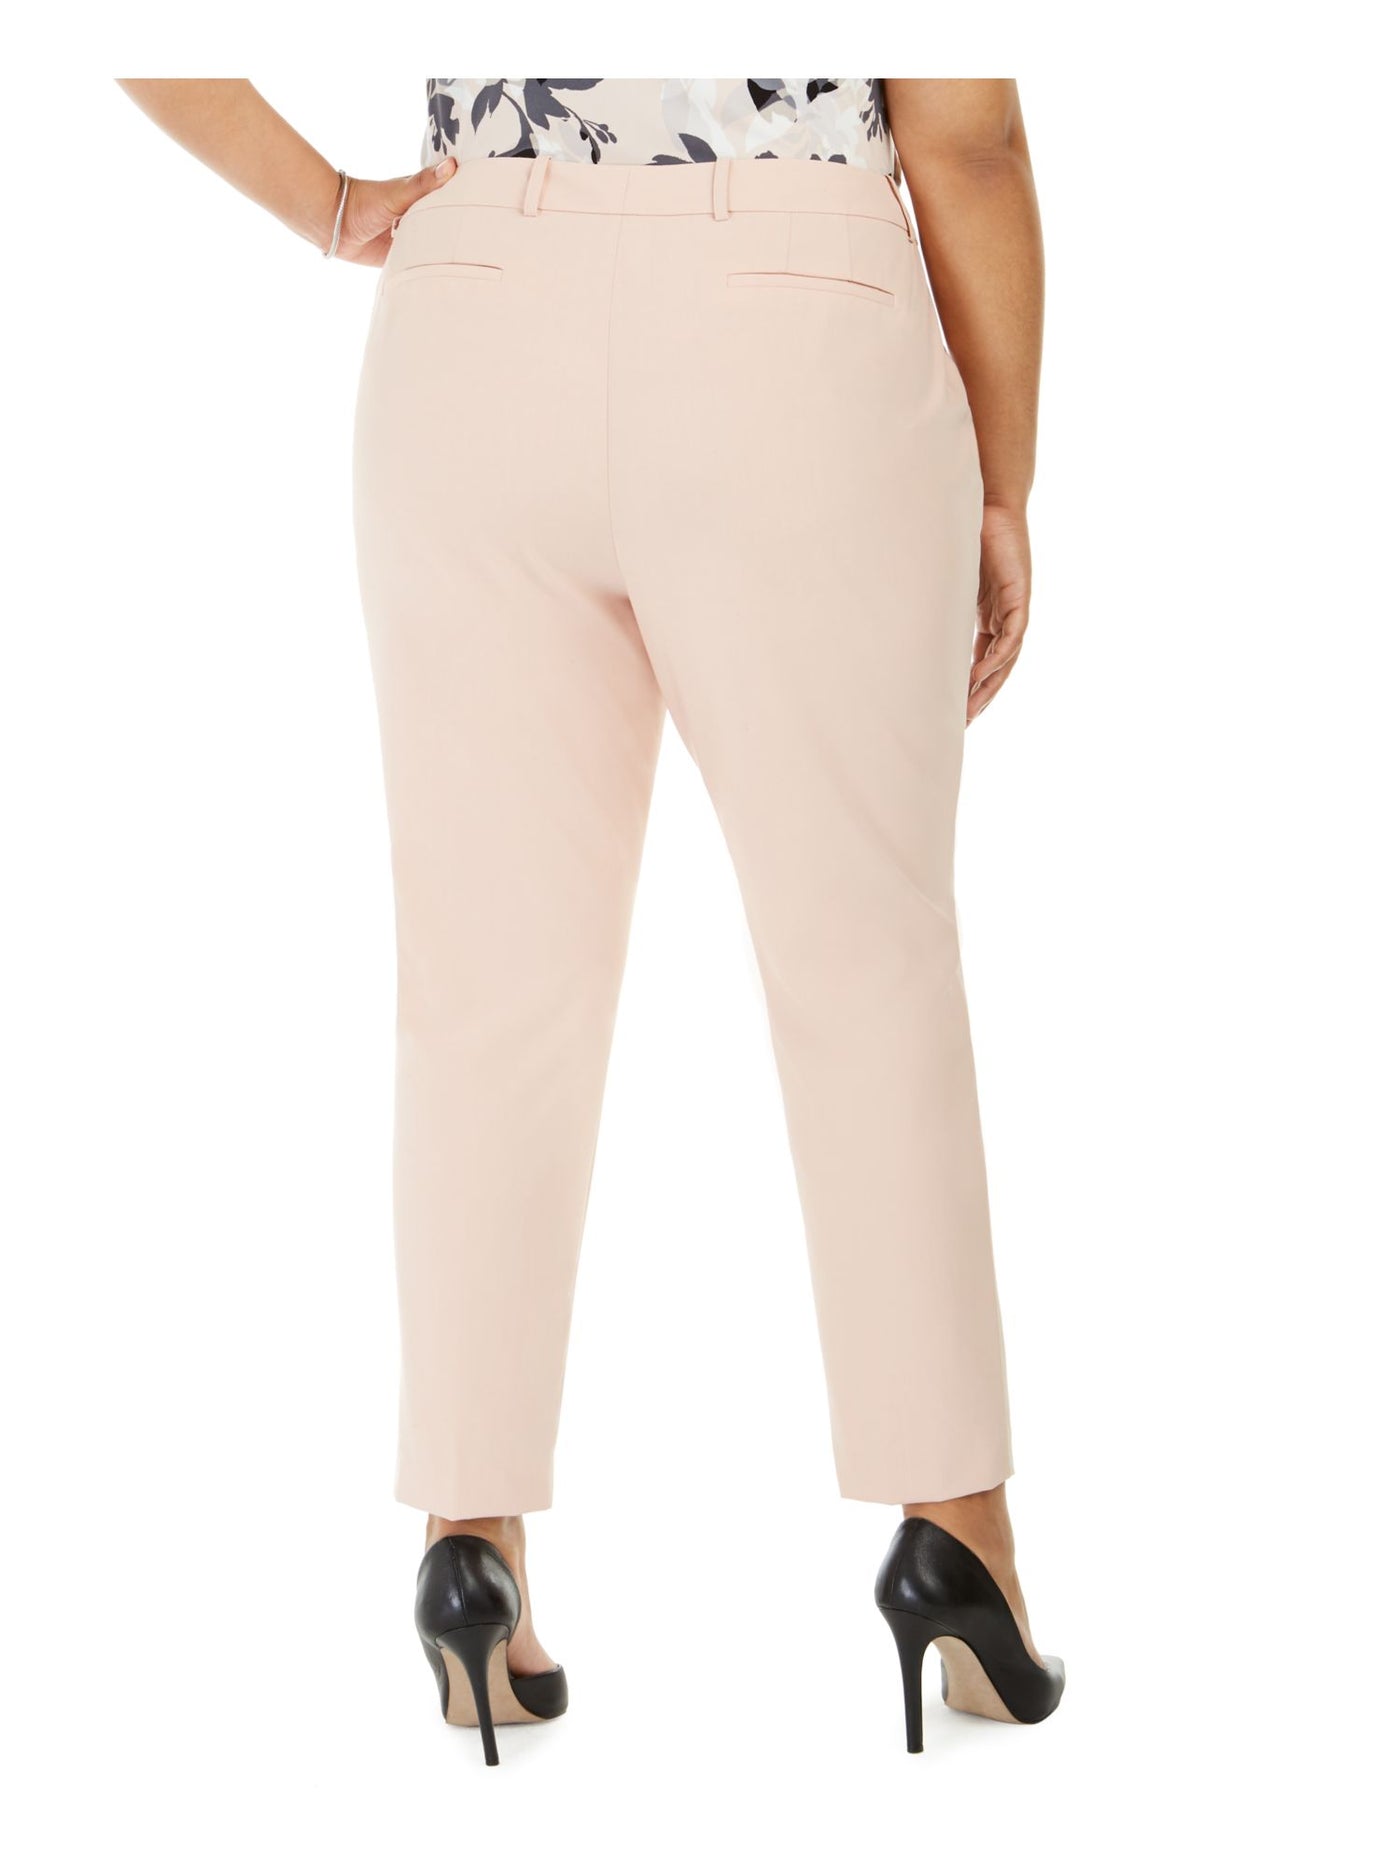 CALVIN KLEIN Womens Pink Stretch Zippered Pocketed Wear To Work Straight leg Pants Plus 22W